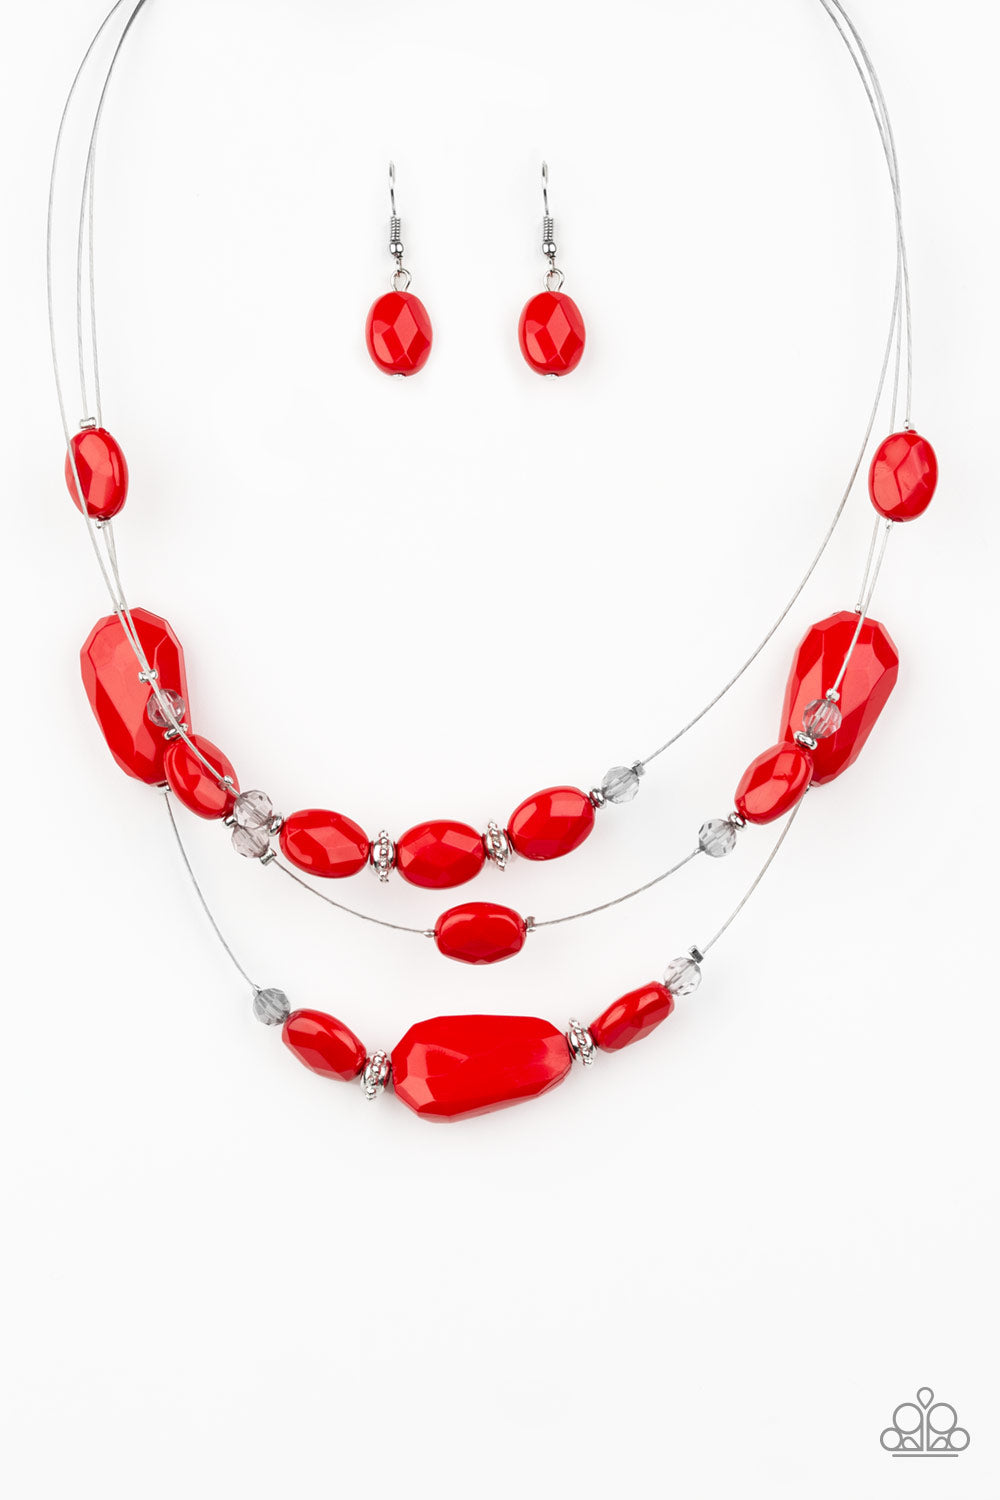 Radiant Reflections - Red - VJ Bedazzled Jewelry